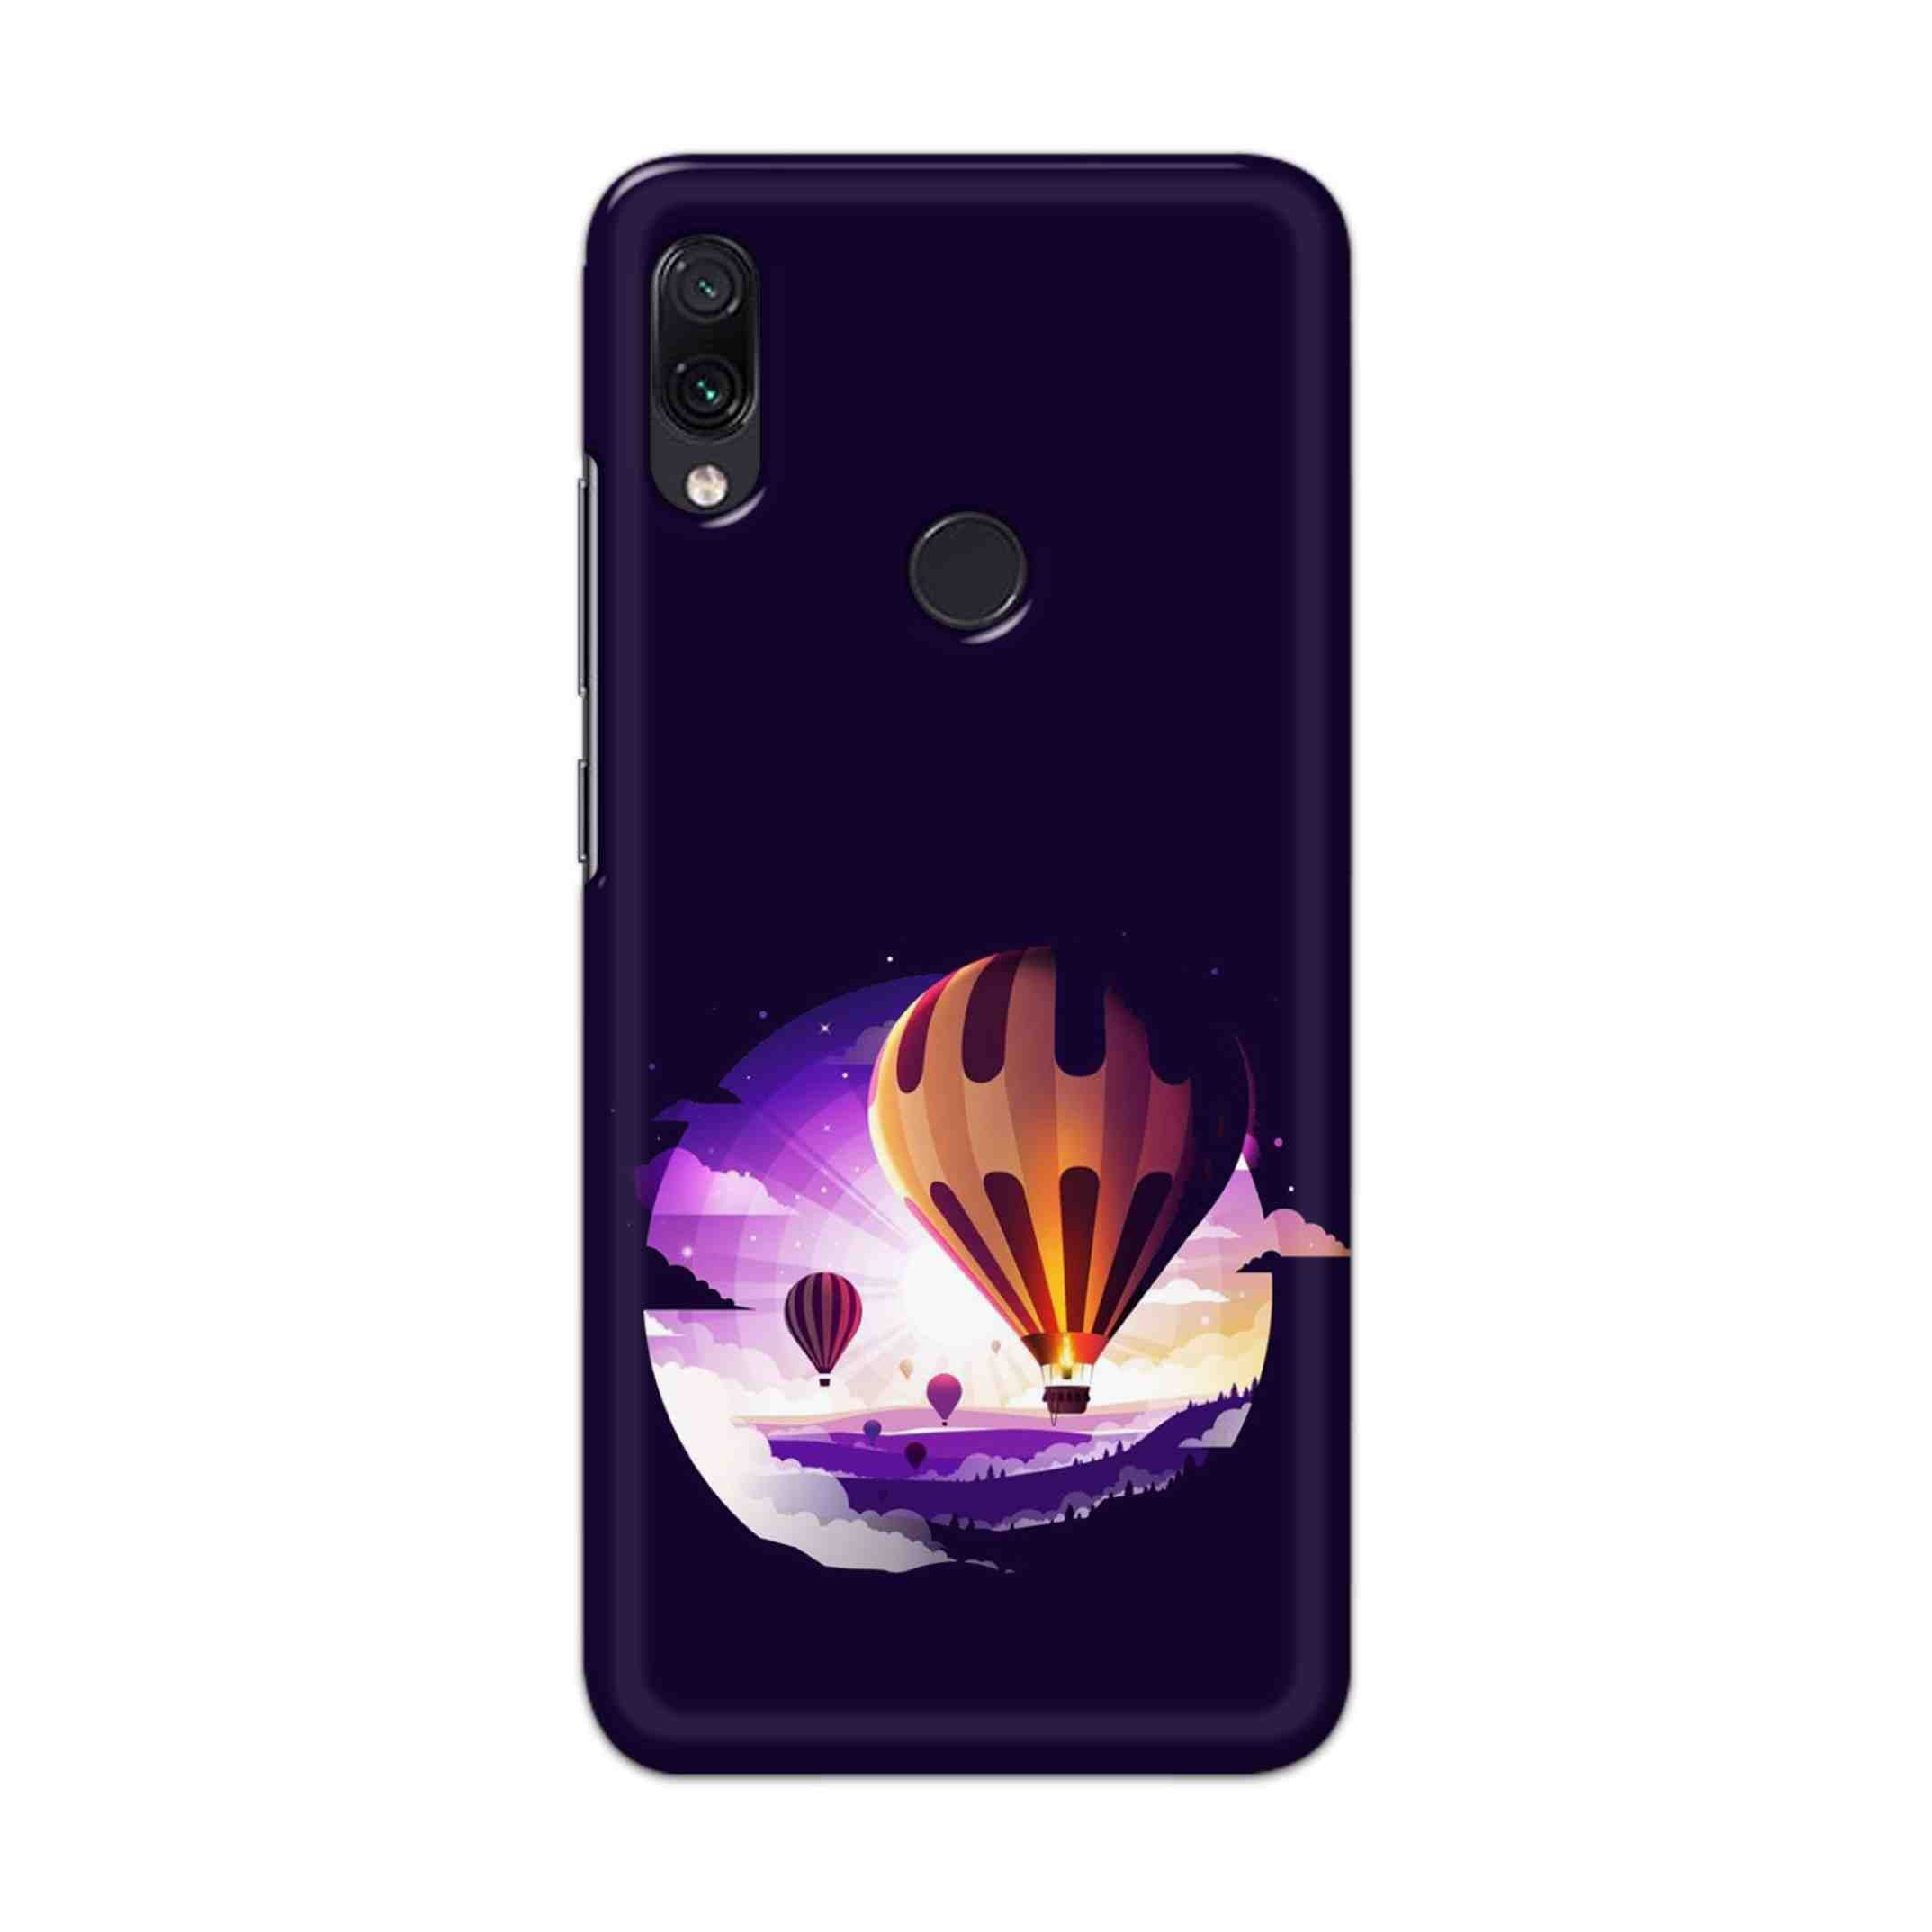 Buy Ballon Hard Back Mobile Phone Case Cover For Redmi Note 7 / Note 7 Pro Online